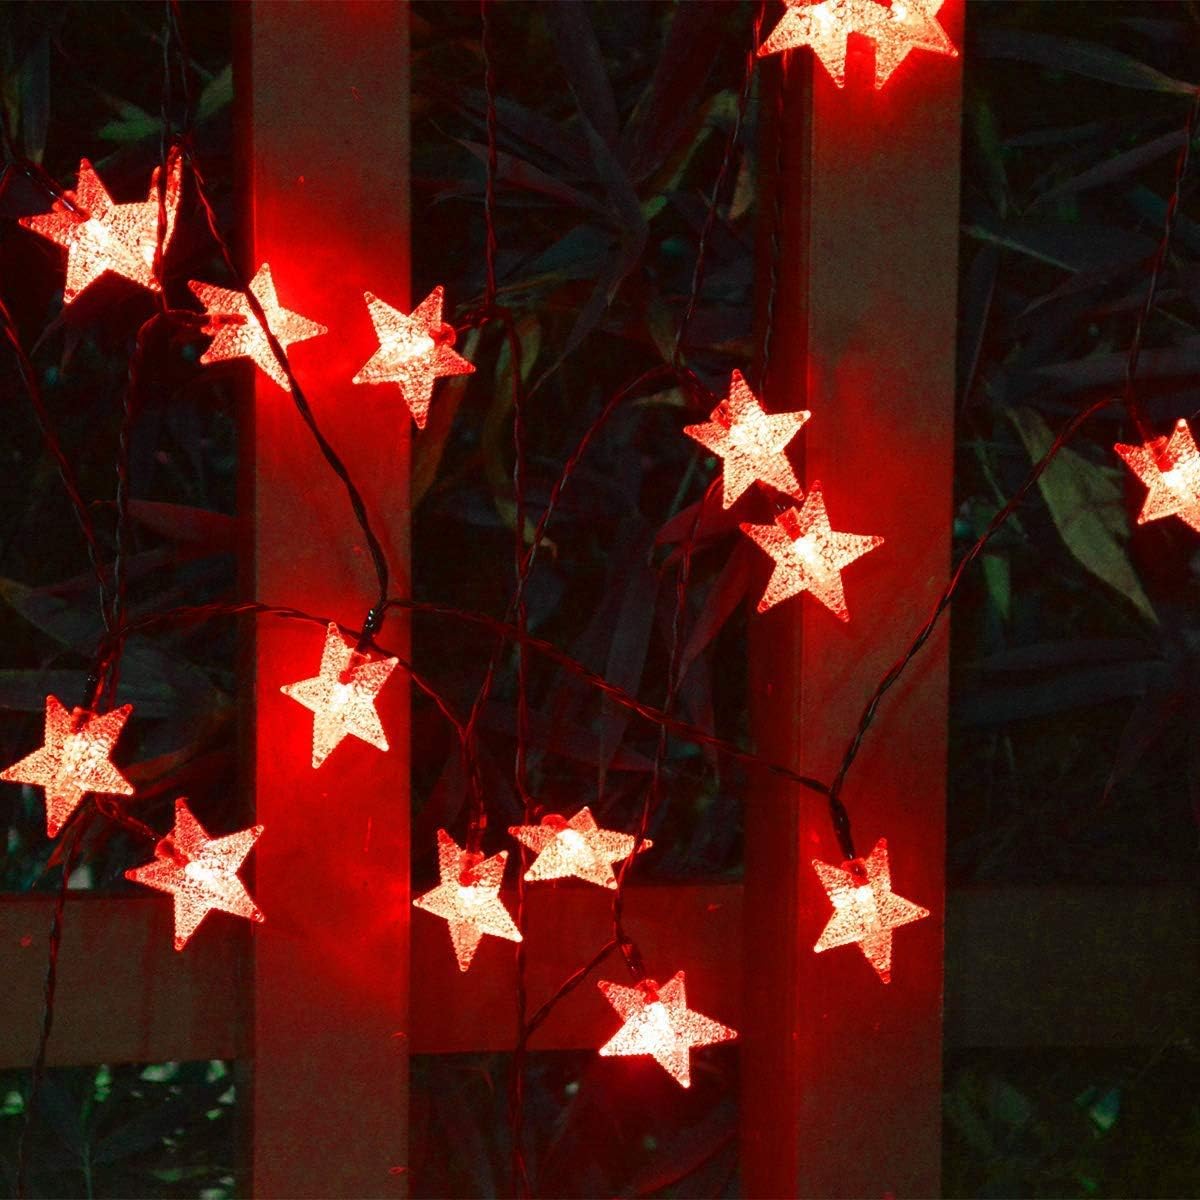 10 Meter Star String Lights for Home Decoration with 8 Modes (Red)